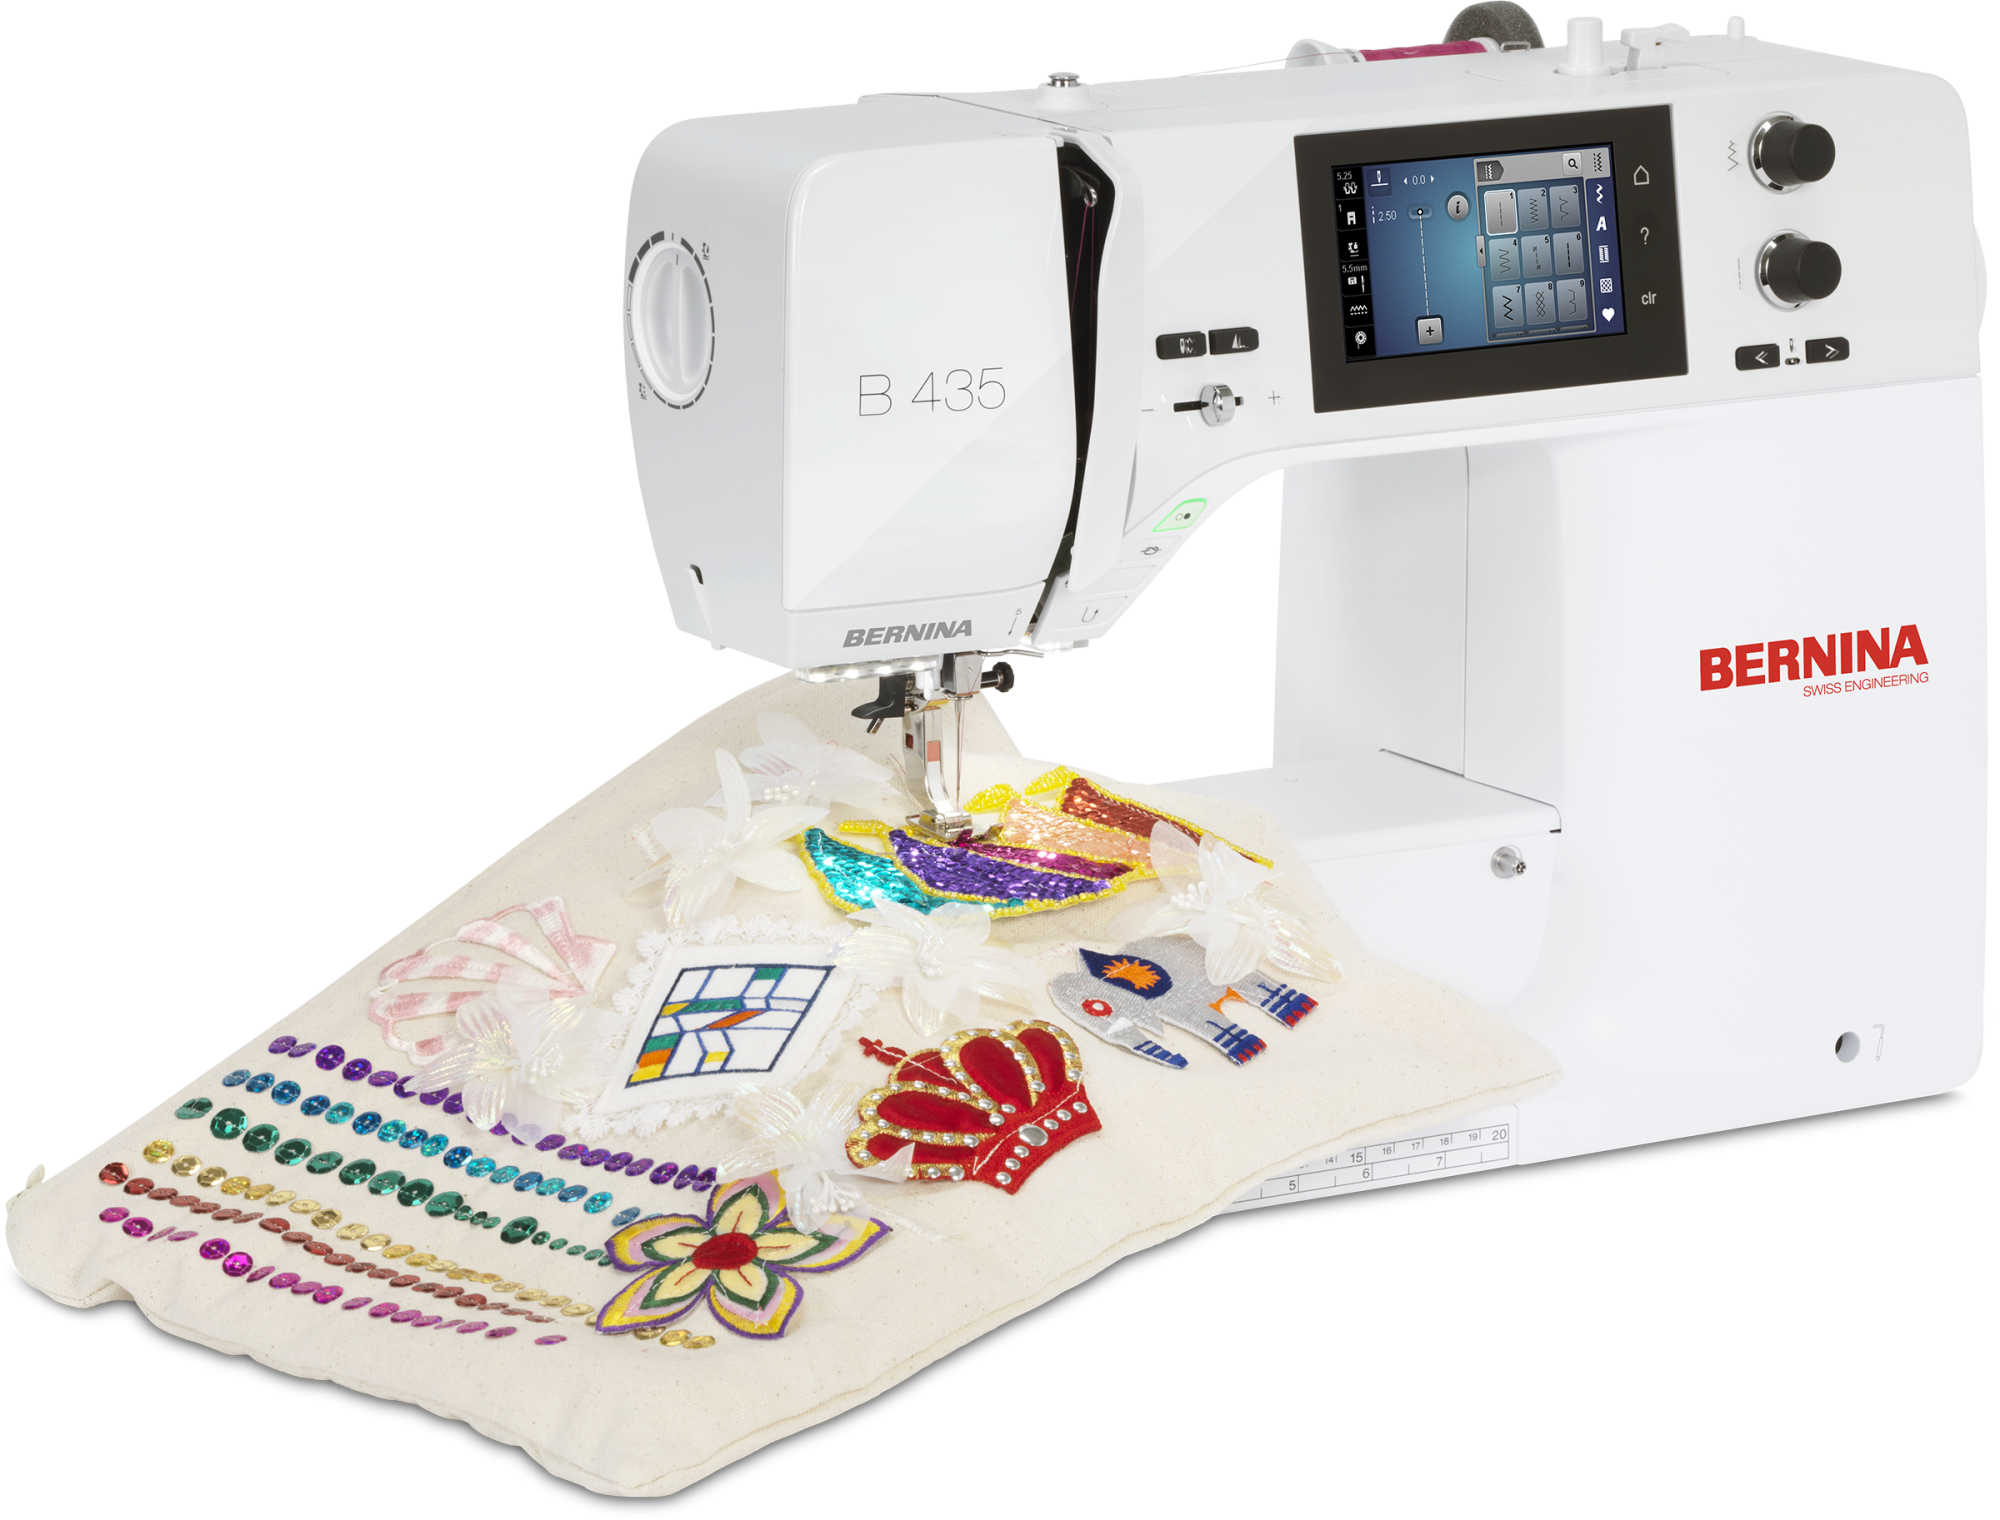 Bernina 435 comes with a built-in repeat pattern function